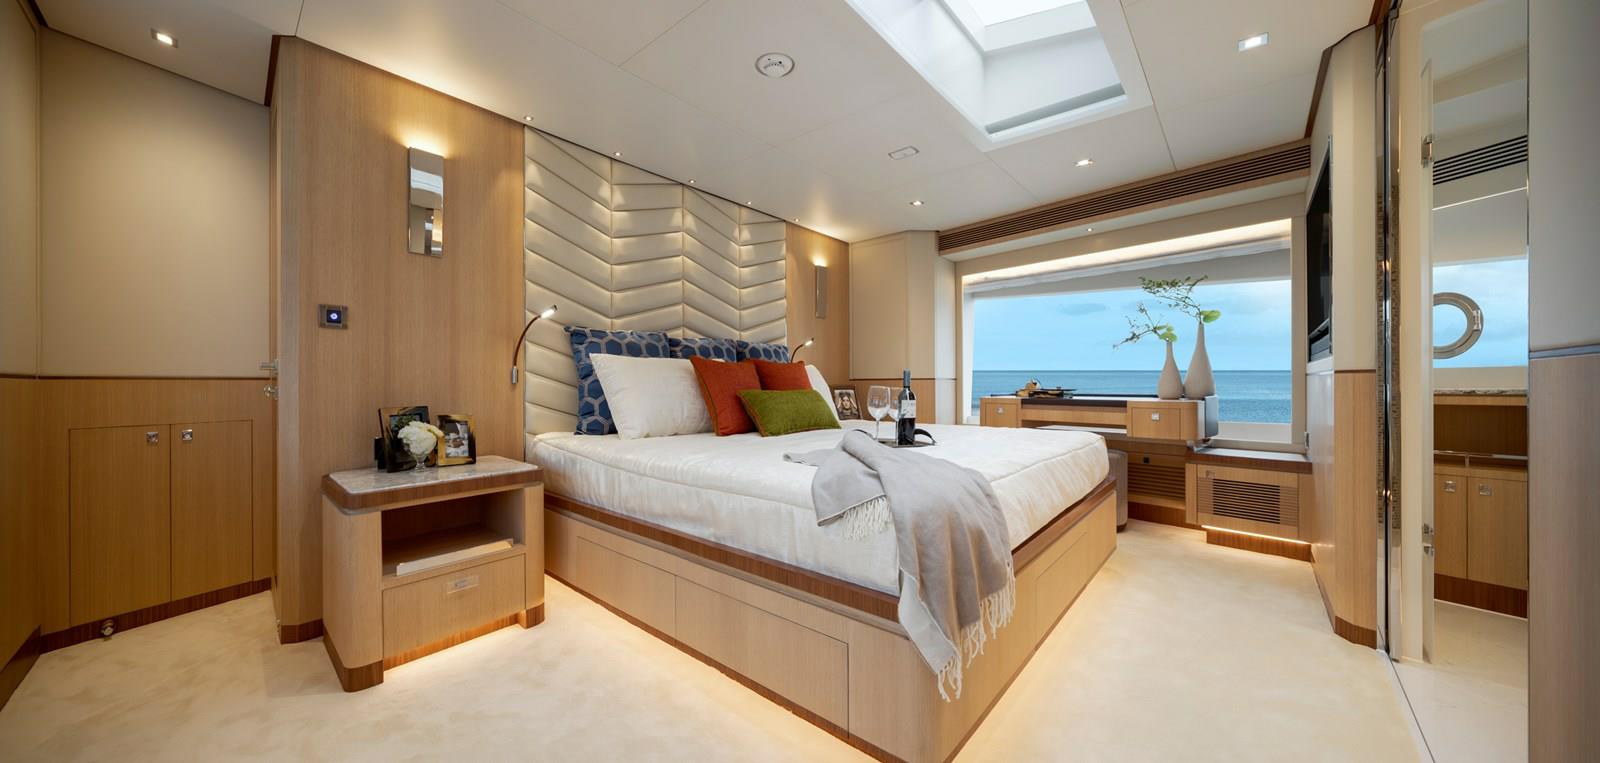 FD87 Aqua Life Master Stateroom with bed, nightstand and desk.